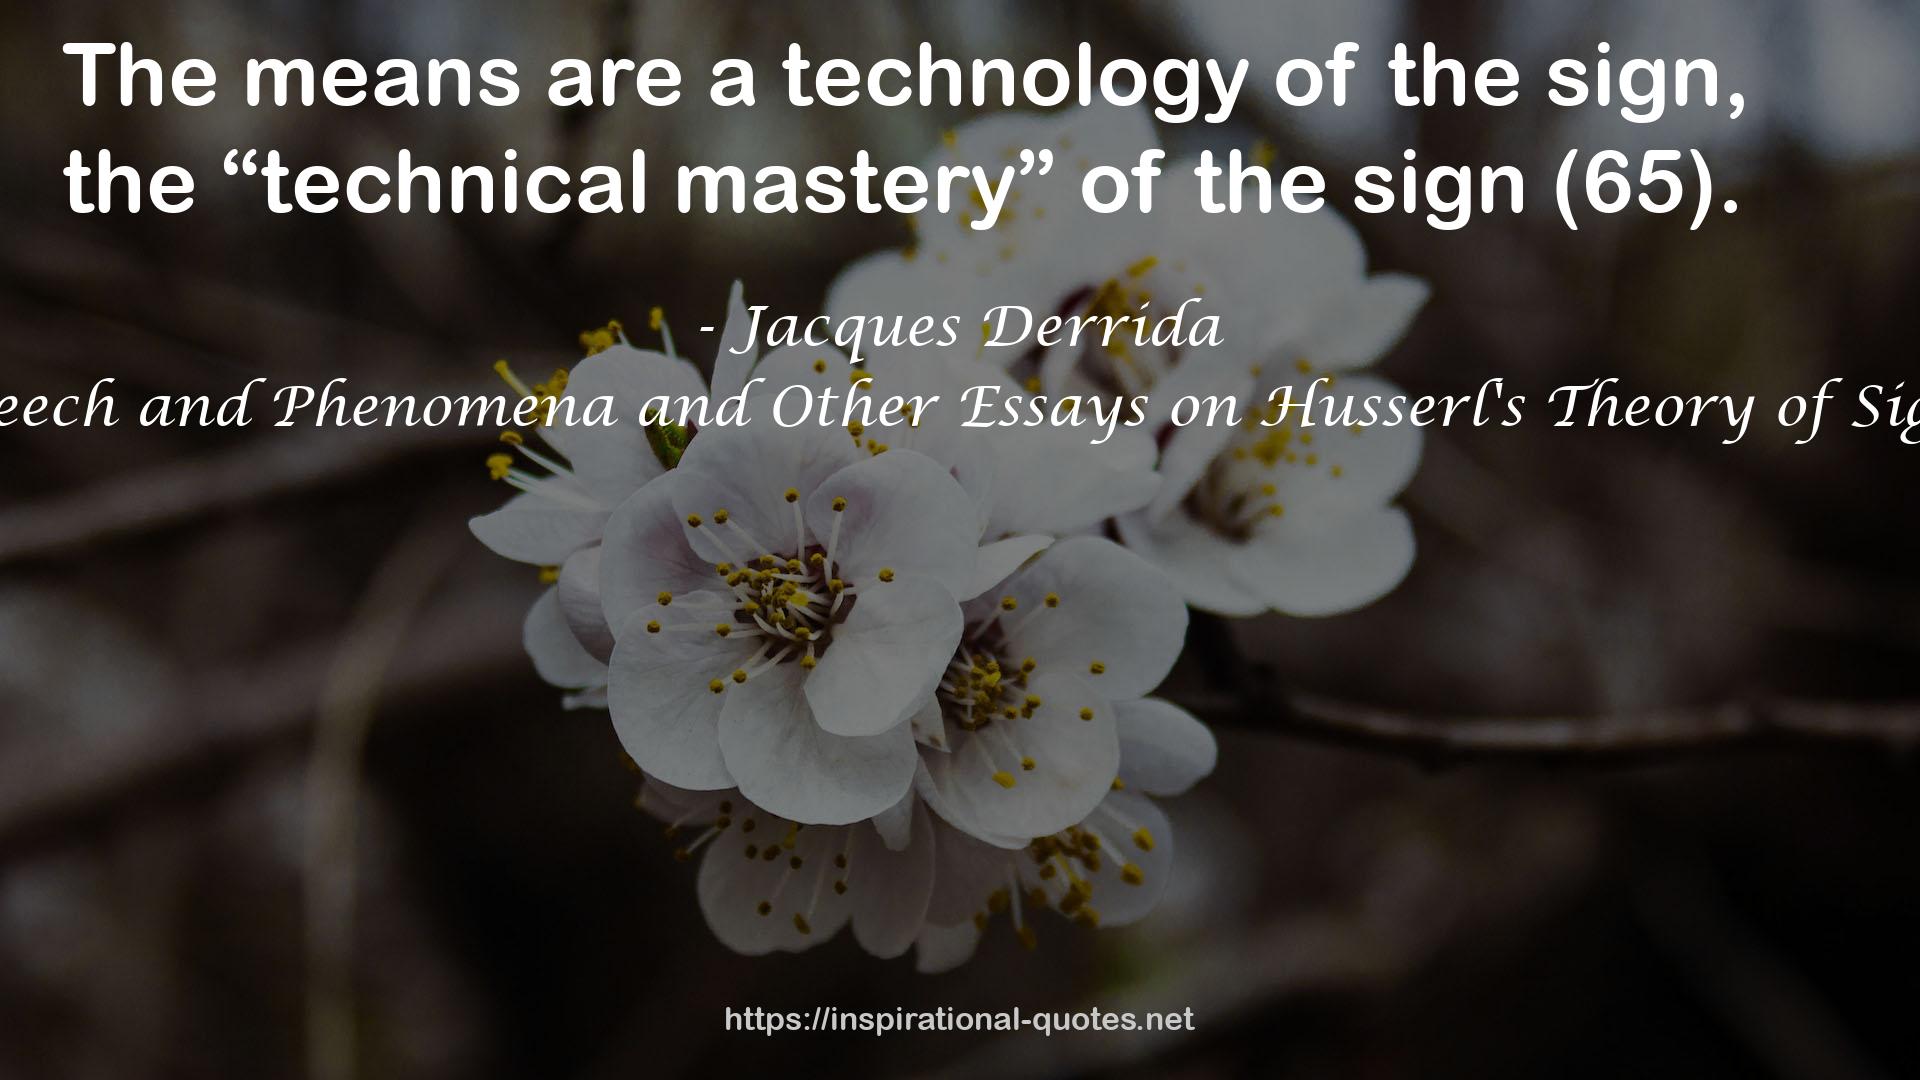 Speech and Phenomena and Other Essays on Husserl's Theory of Signs QUOTES